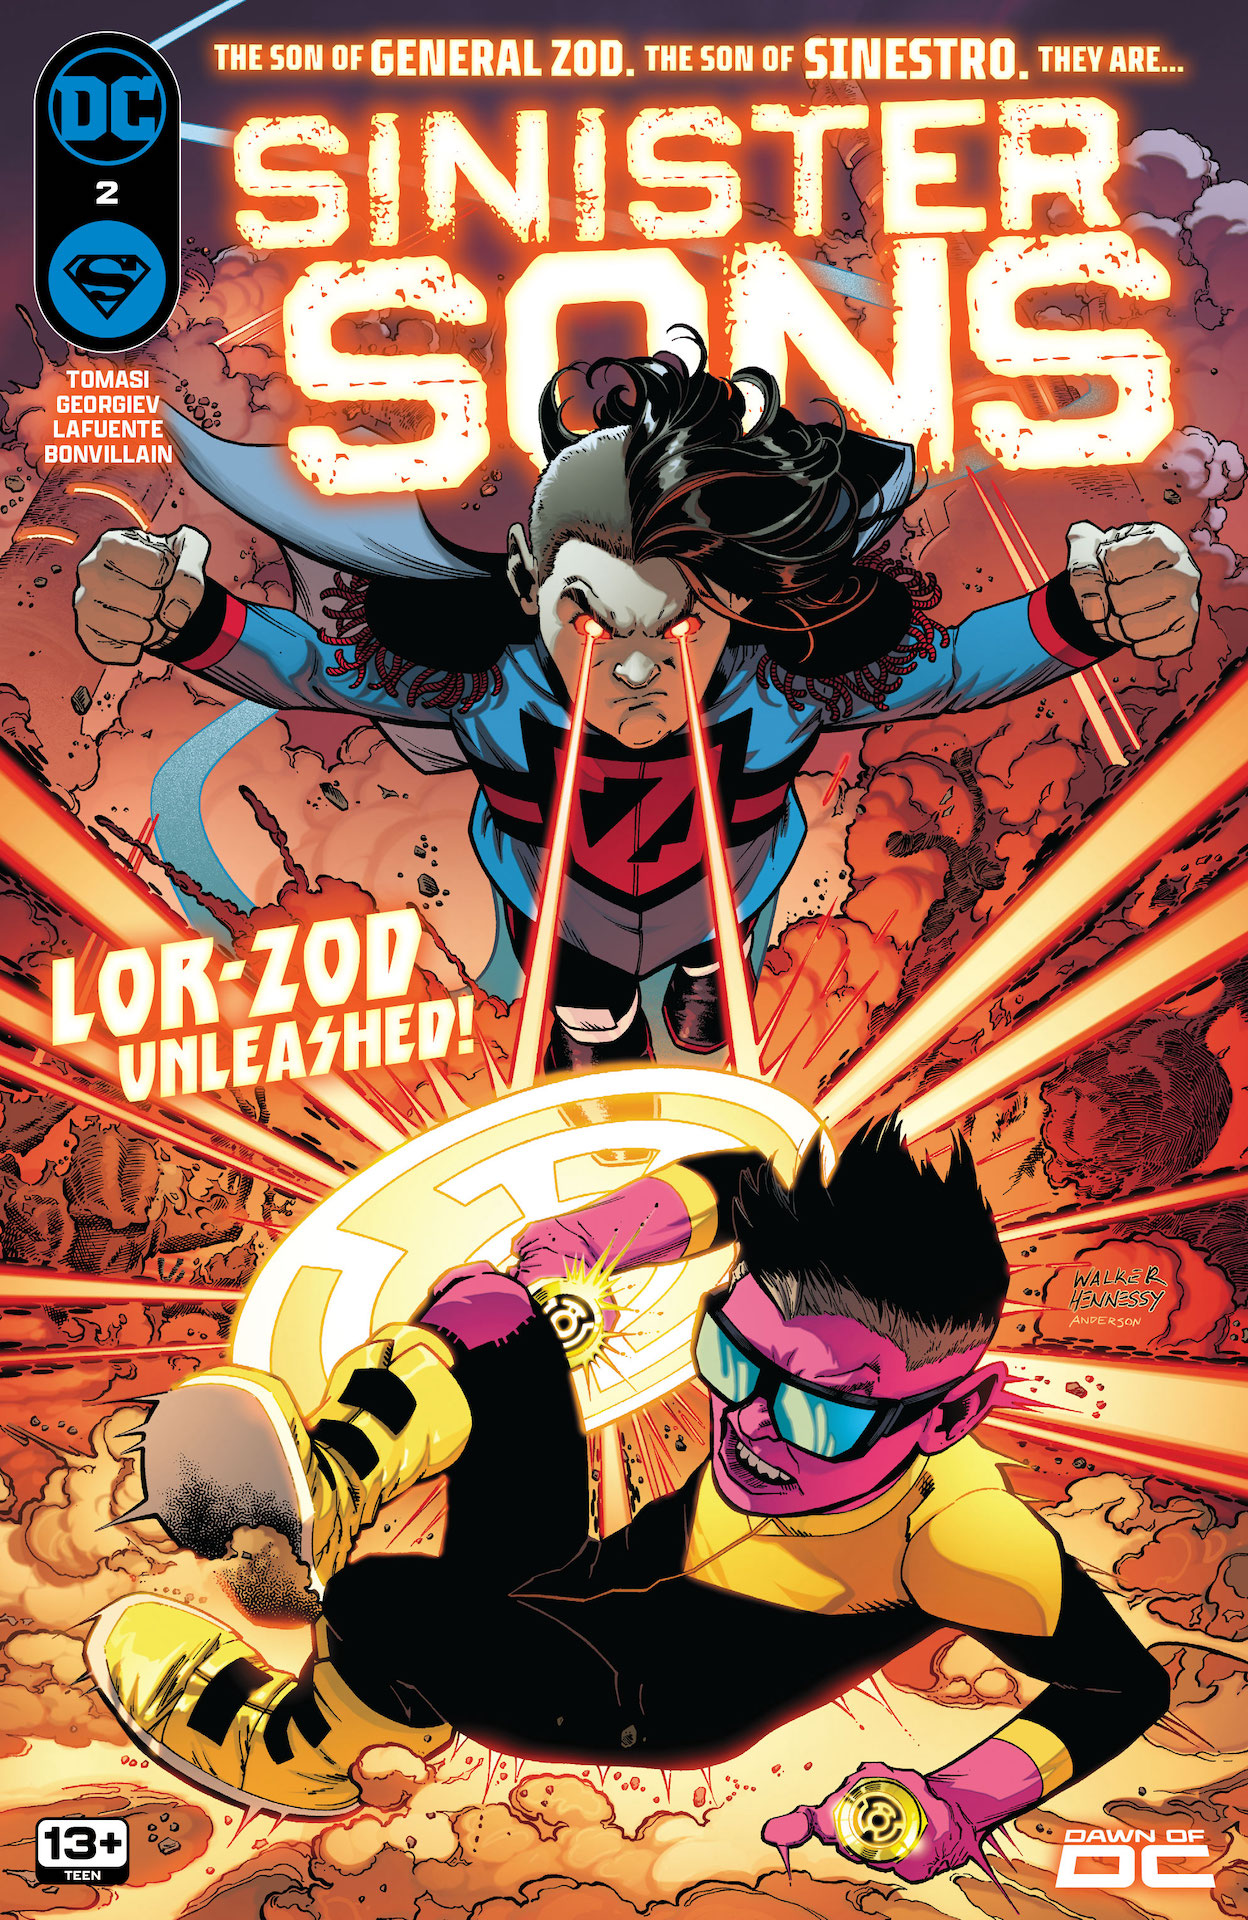 DC Preview: Sinister Sons #2